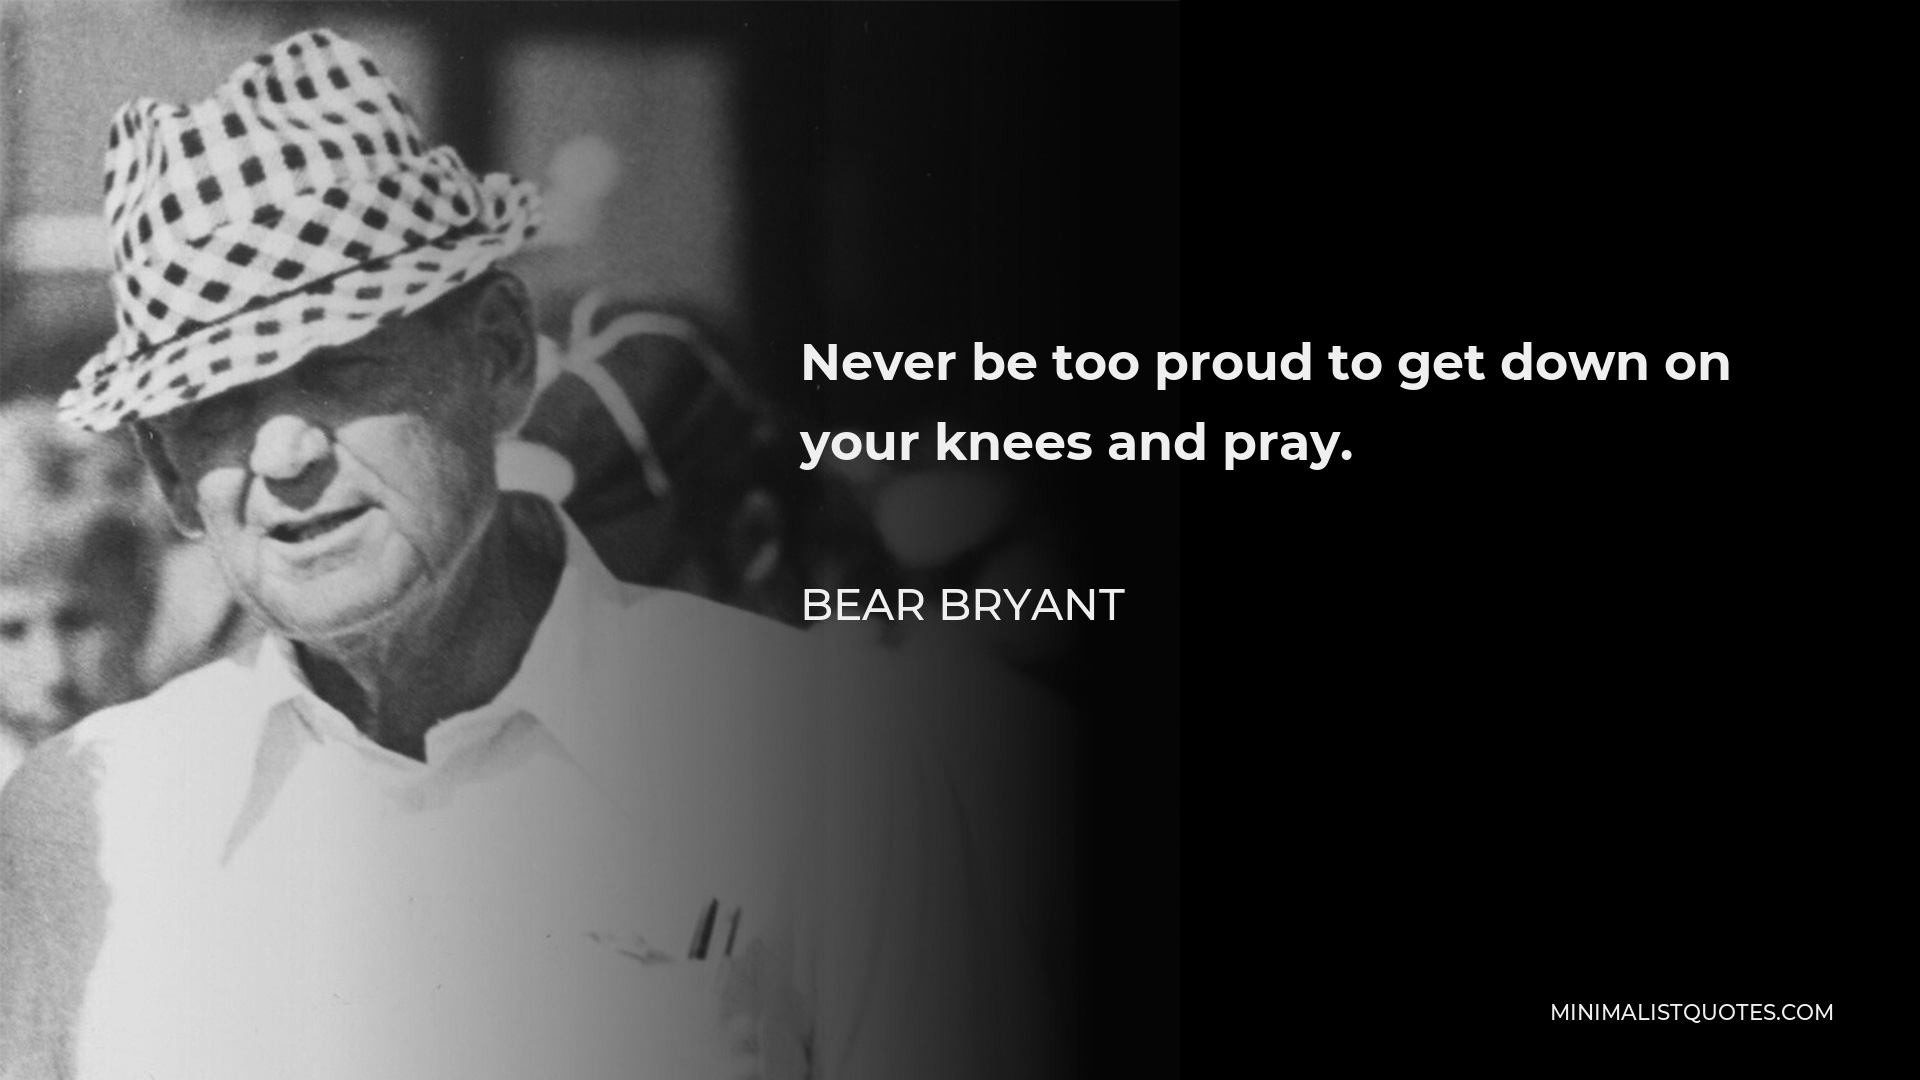 Bear Bryant Quote - Never be too proud to get down on your knees and pray.